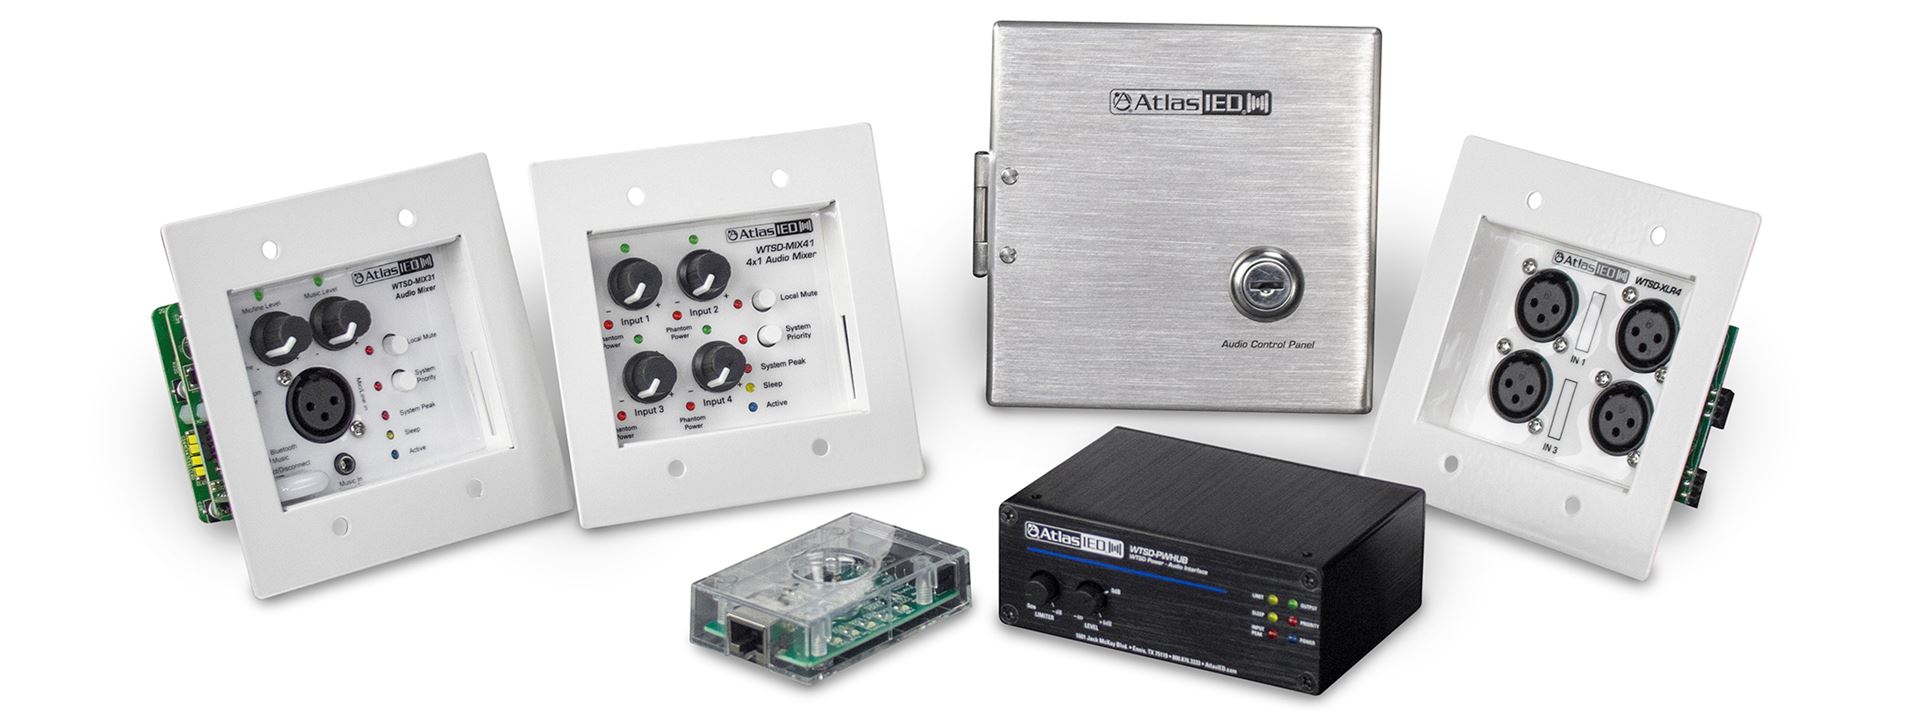 Several New Commercial Audio Processing Products Added to TSD Lineup 